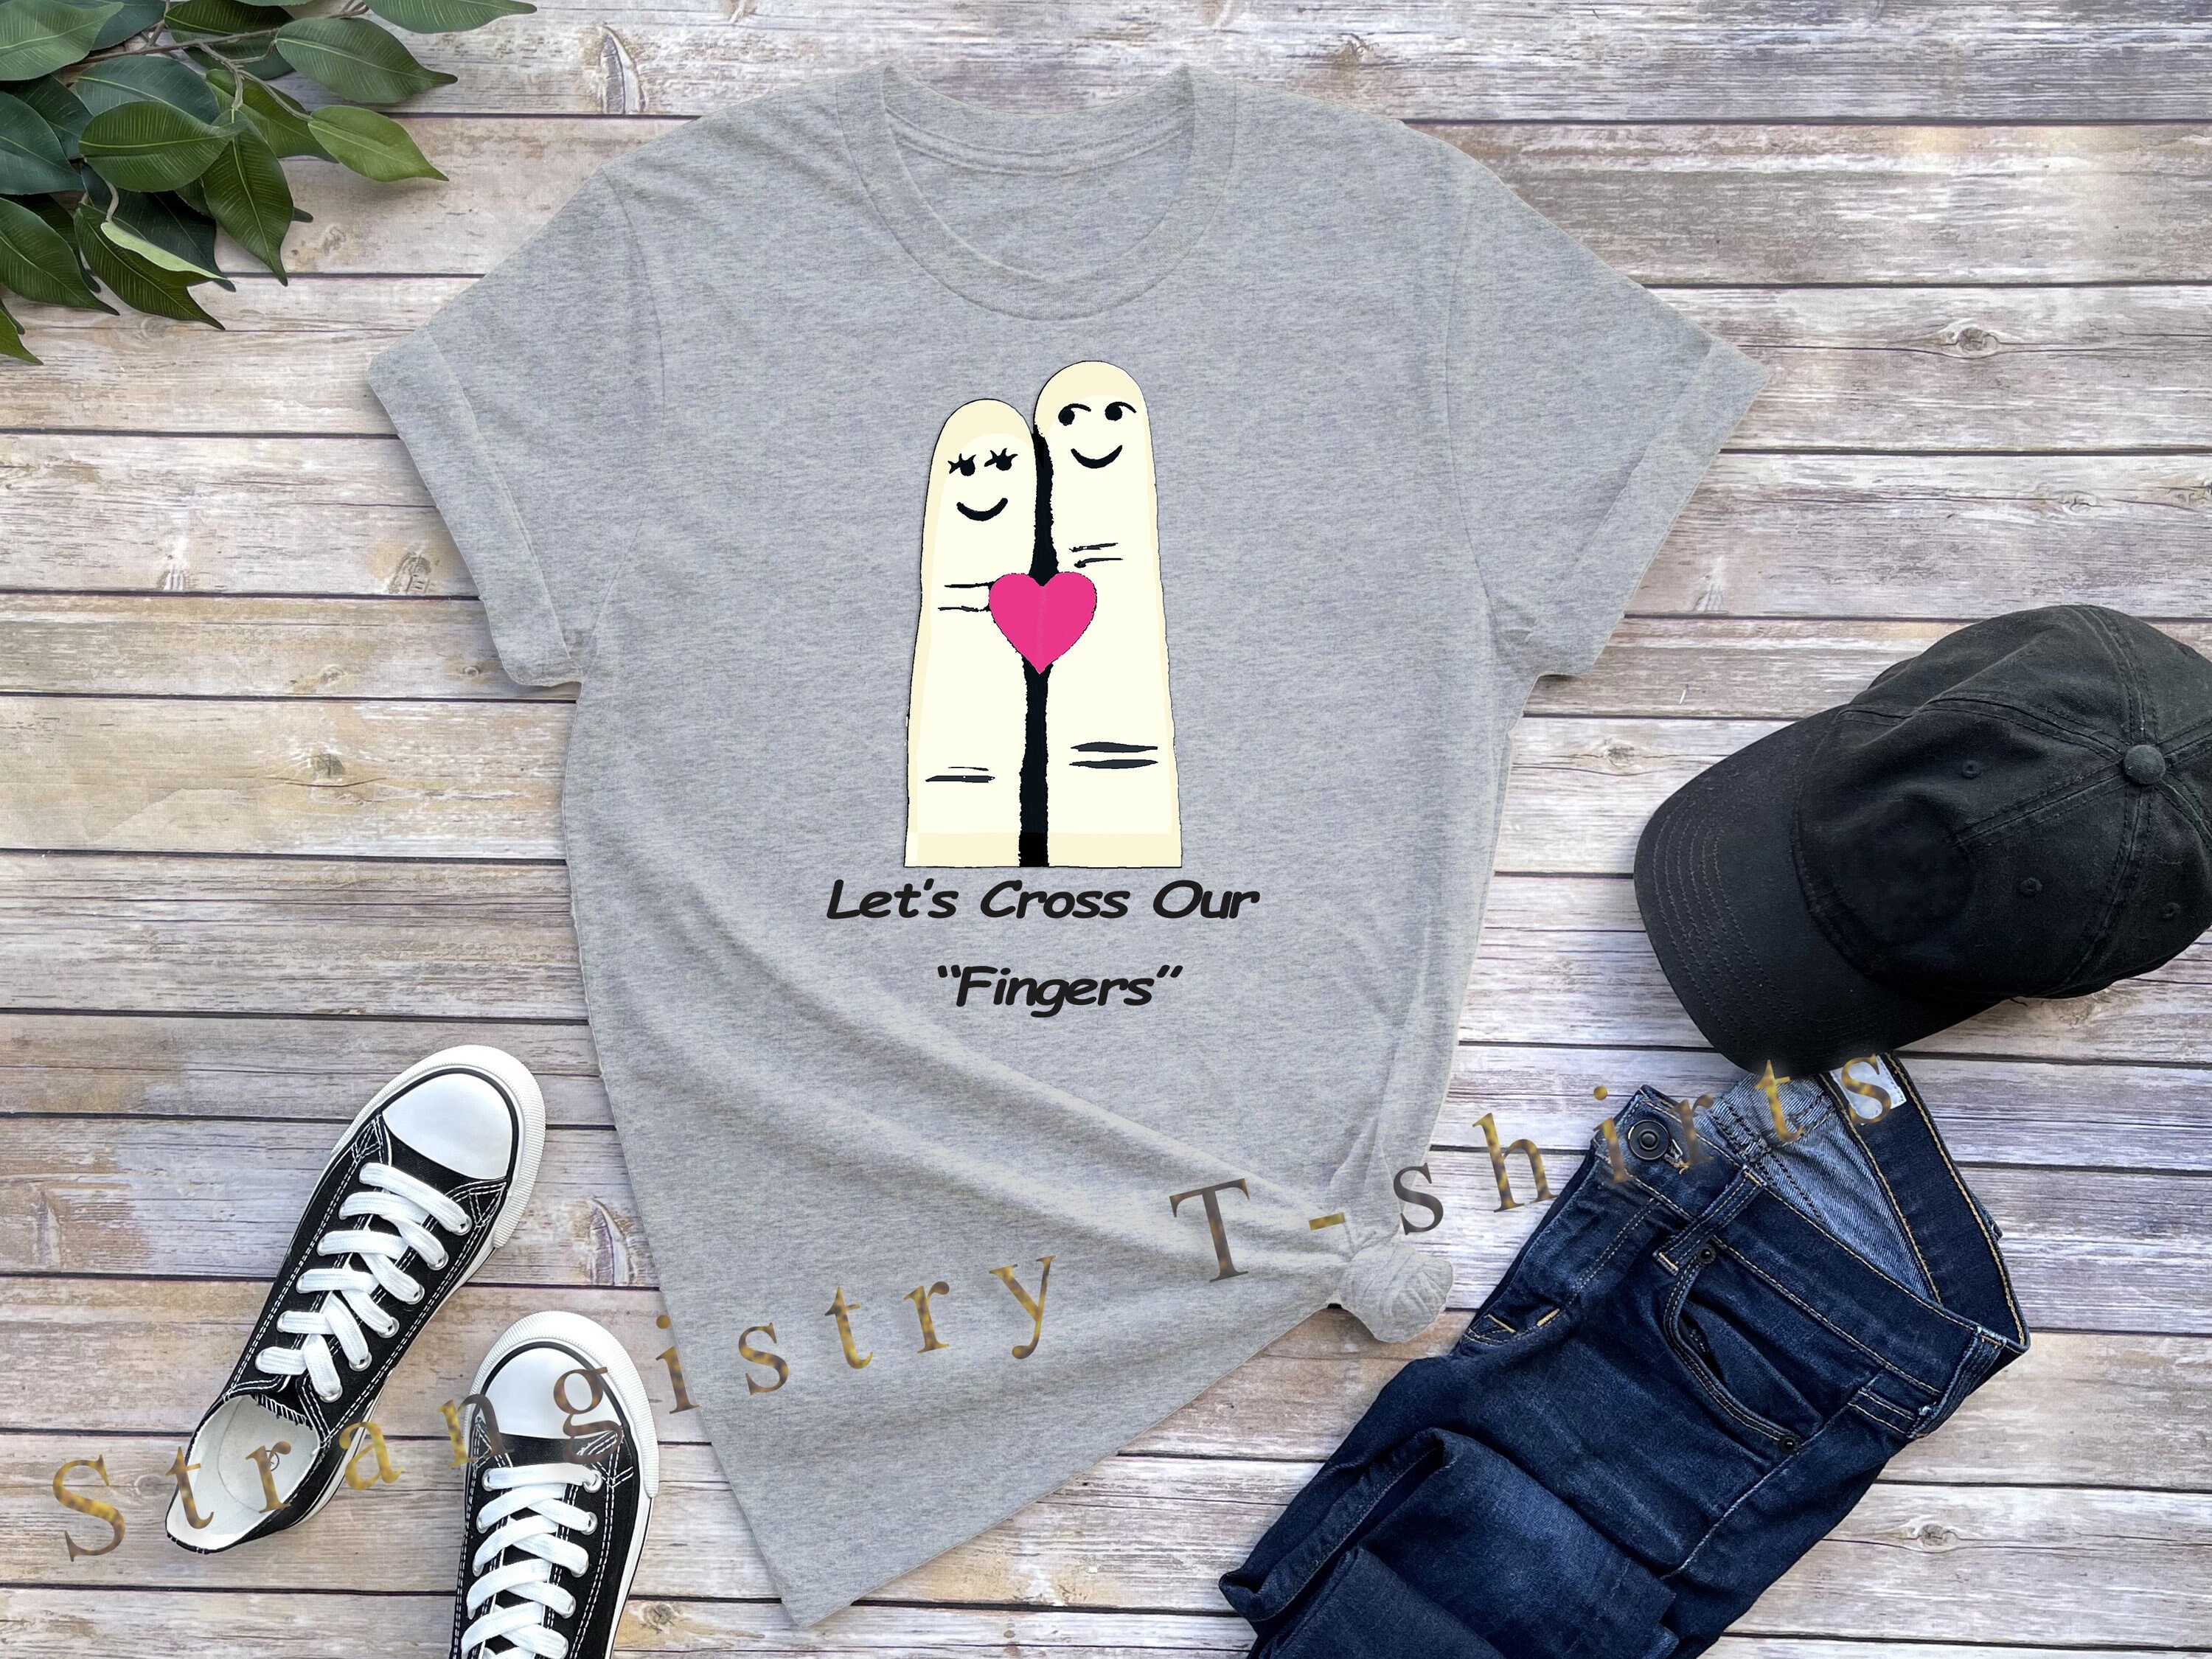 Cute Love Custom T-shirt with Text of “Let’s Cross our Fingers”. Funny Graphic Design Love Shirt for Couples and Crushes.